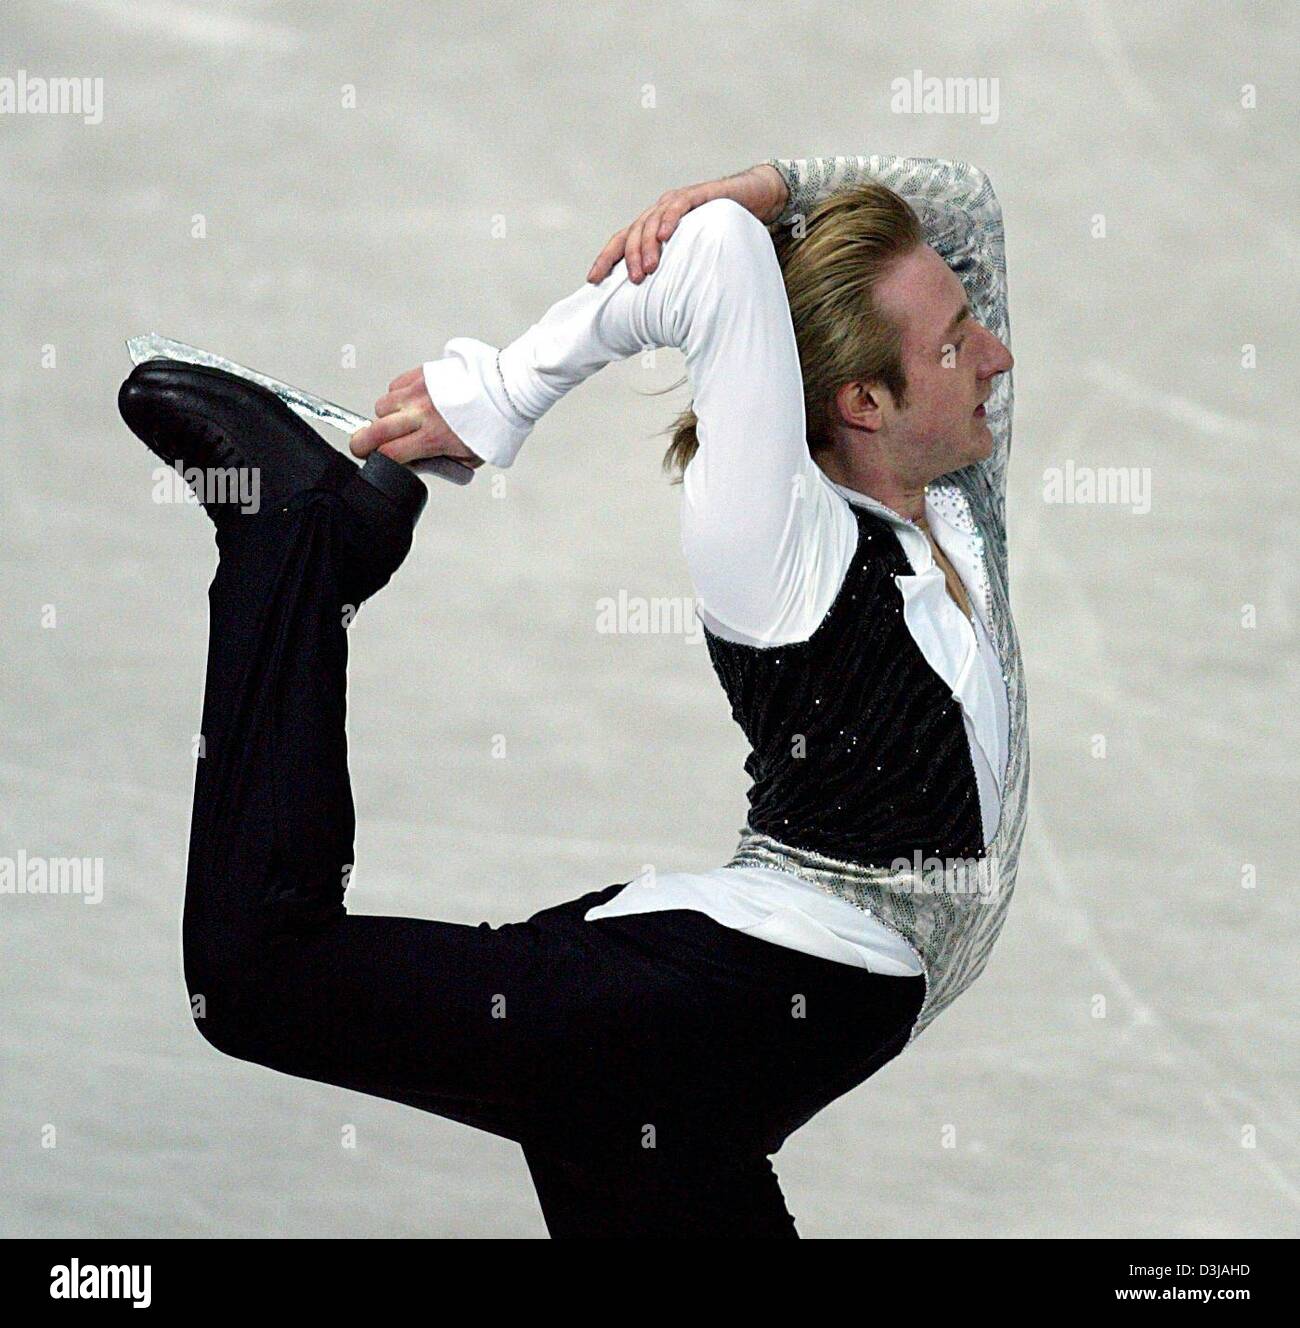 (dpa) Russian skater Evgeni Plushenko performs during the men's qualifying round of the Figure Skating World Championship in Dortmund, Germany, Monday, 22 March 2004. The world championship will last until 28 March 2004. Stock Photo